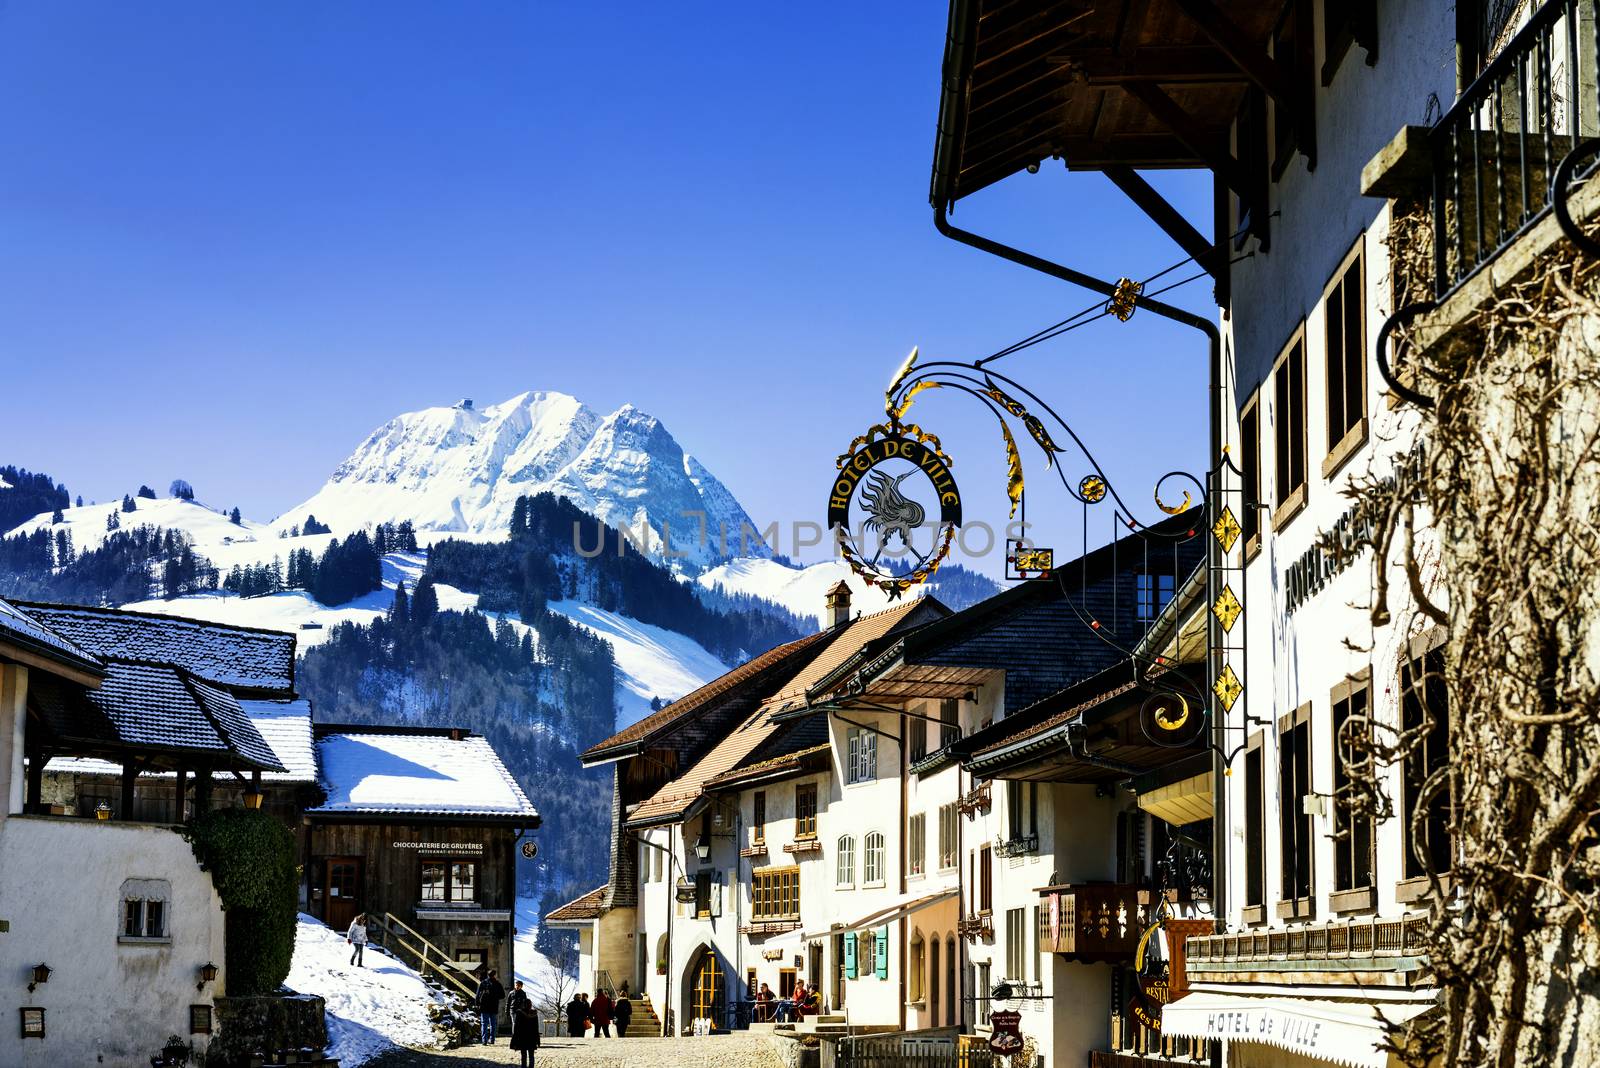 GRUYERES, SWITZERLAND - MARCH 03, 2015: View of the main street in the swiss village Gruyeres, Switzerland . The town and region are famous for their Swiss Cheese called Gruyere.